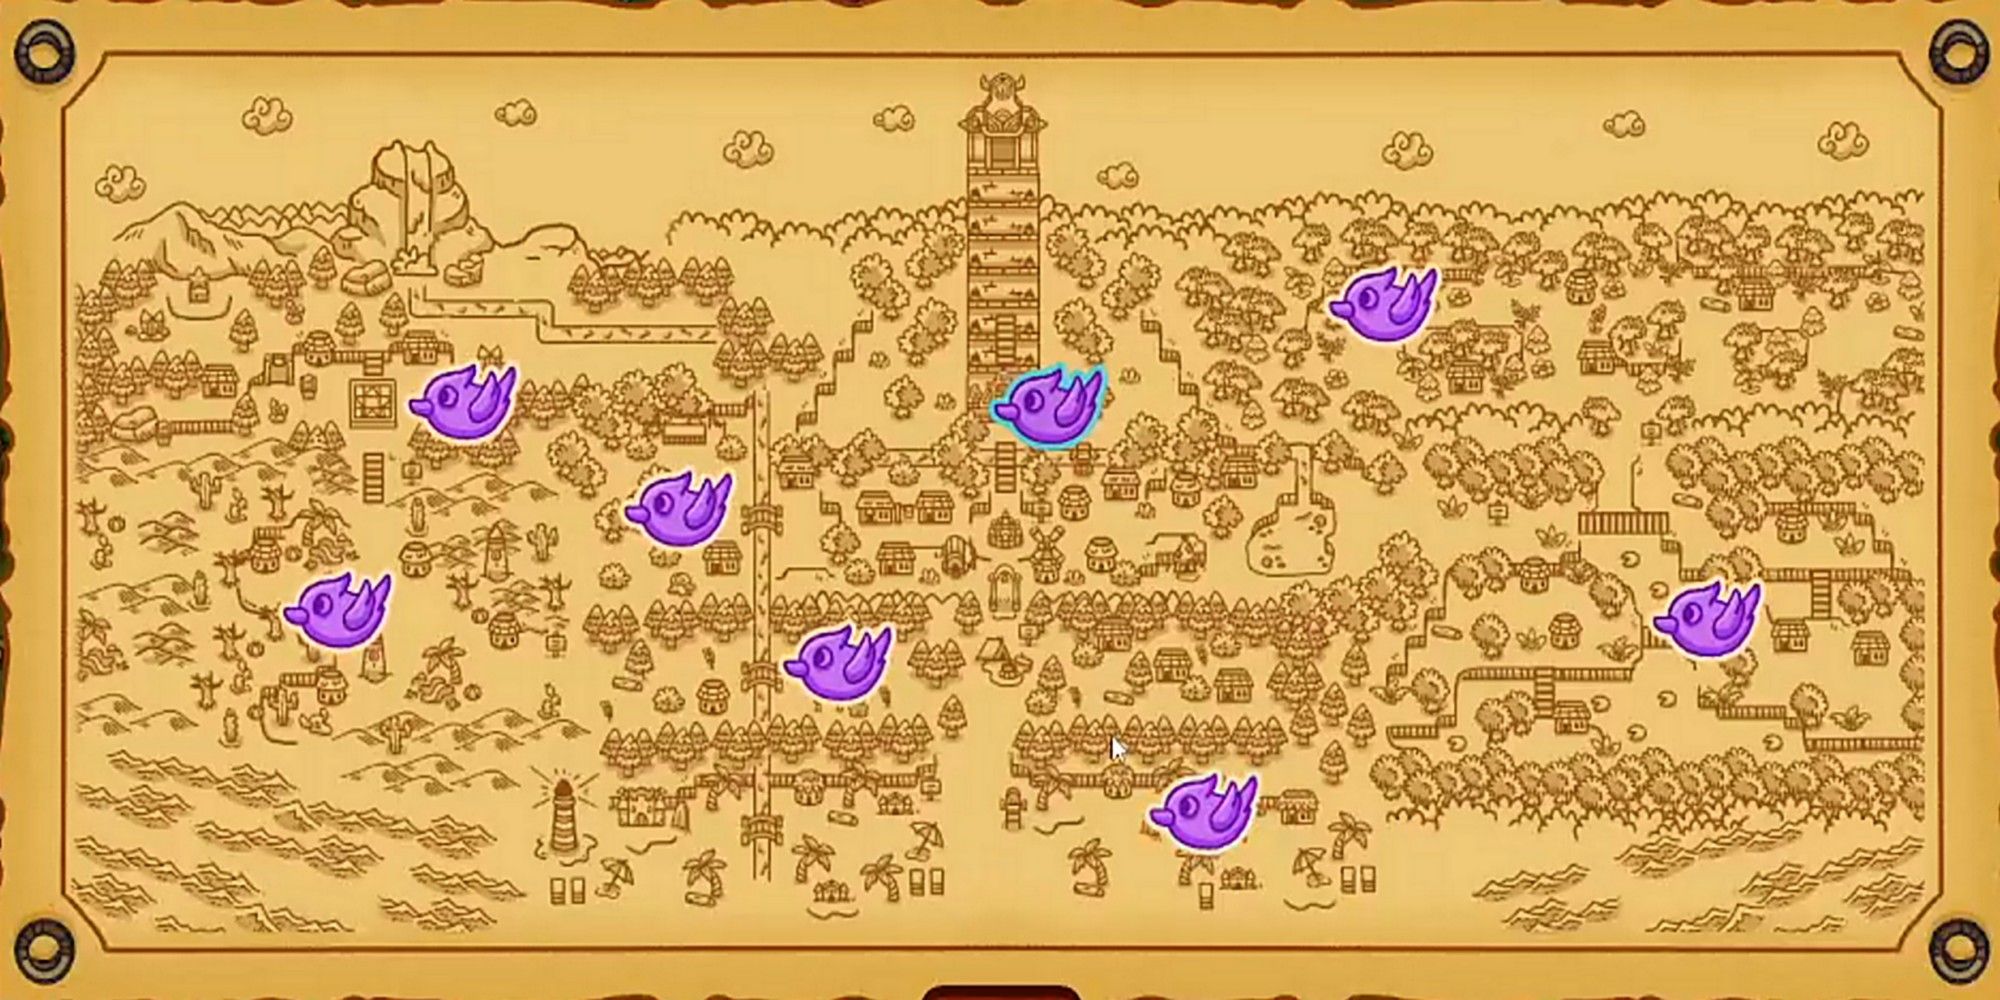 the completed lonesome village map with fast travel points